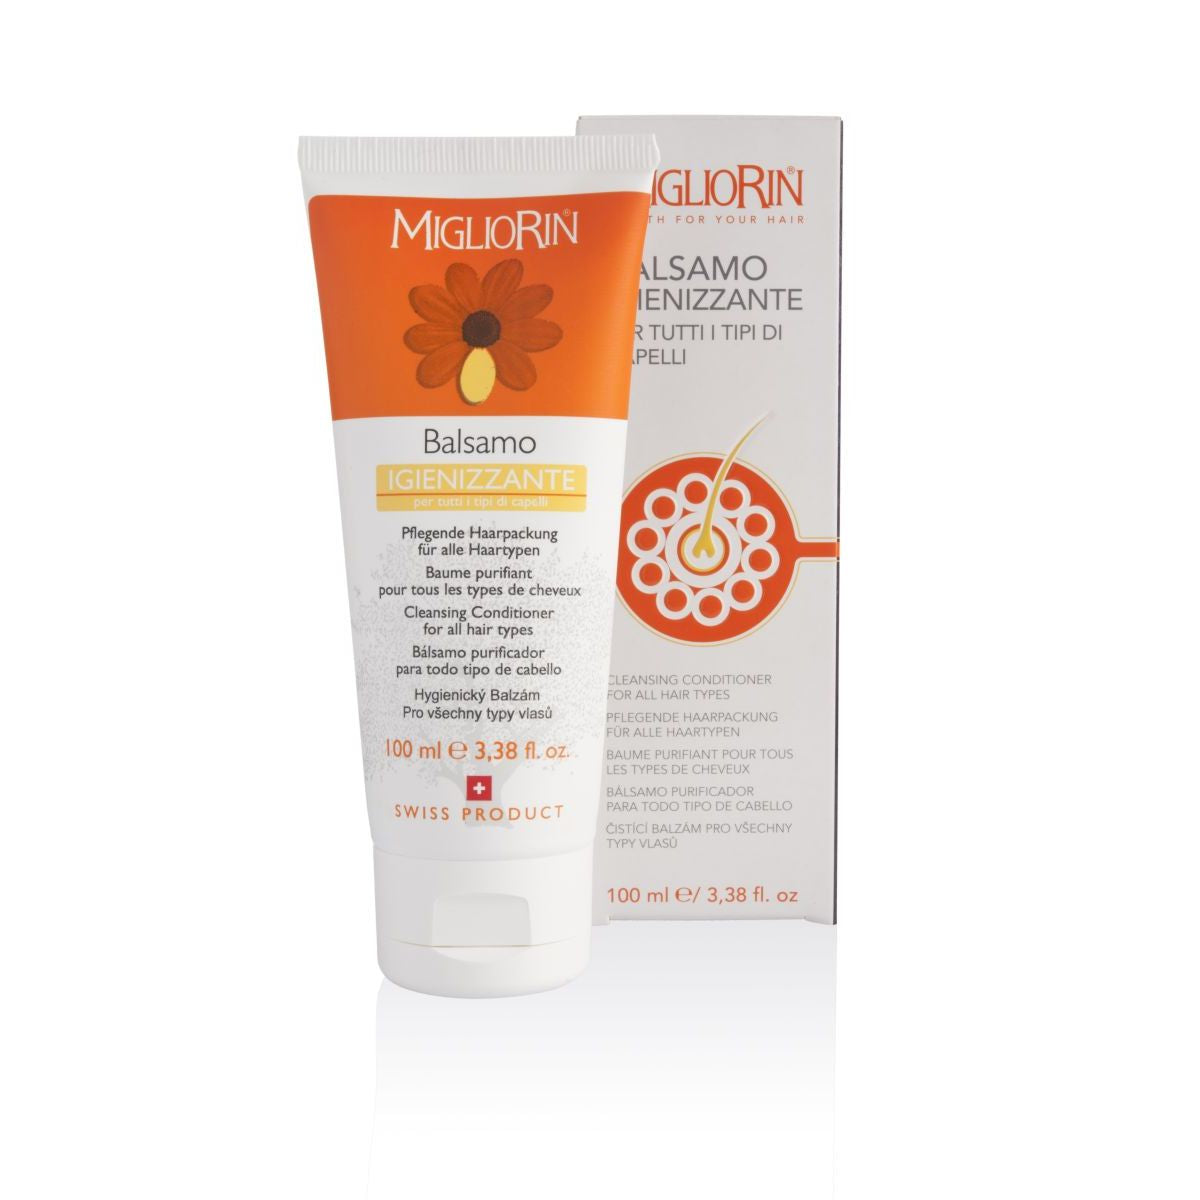 Migliorin Cleansing Conditioner for all hair types